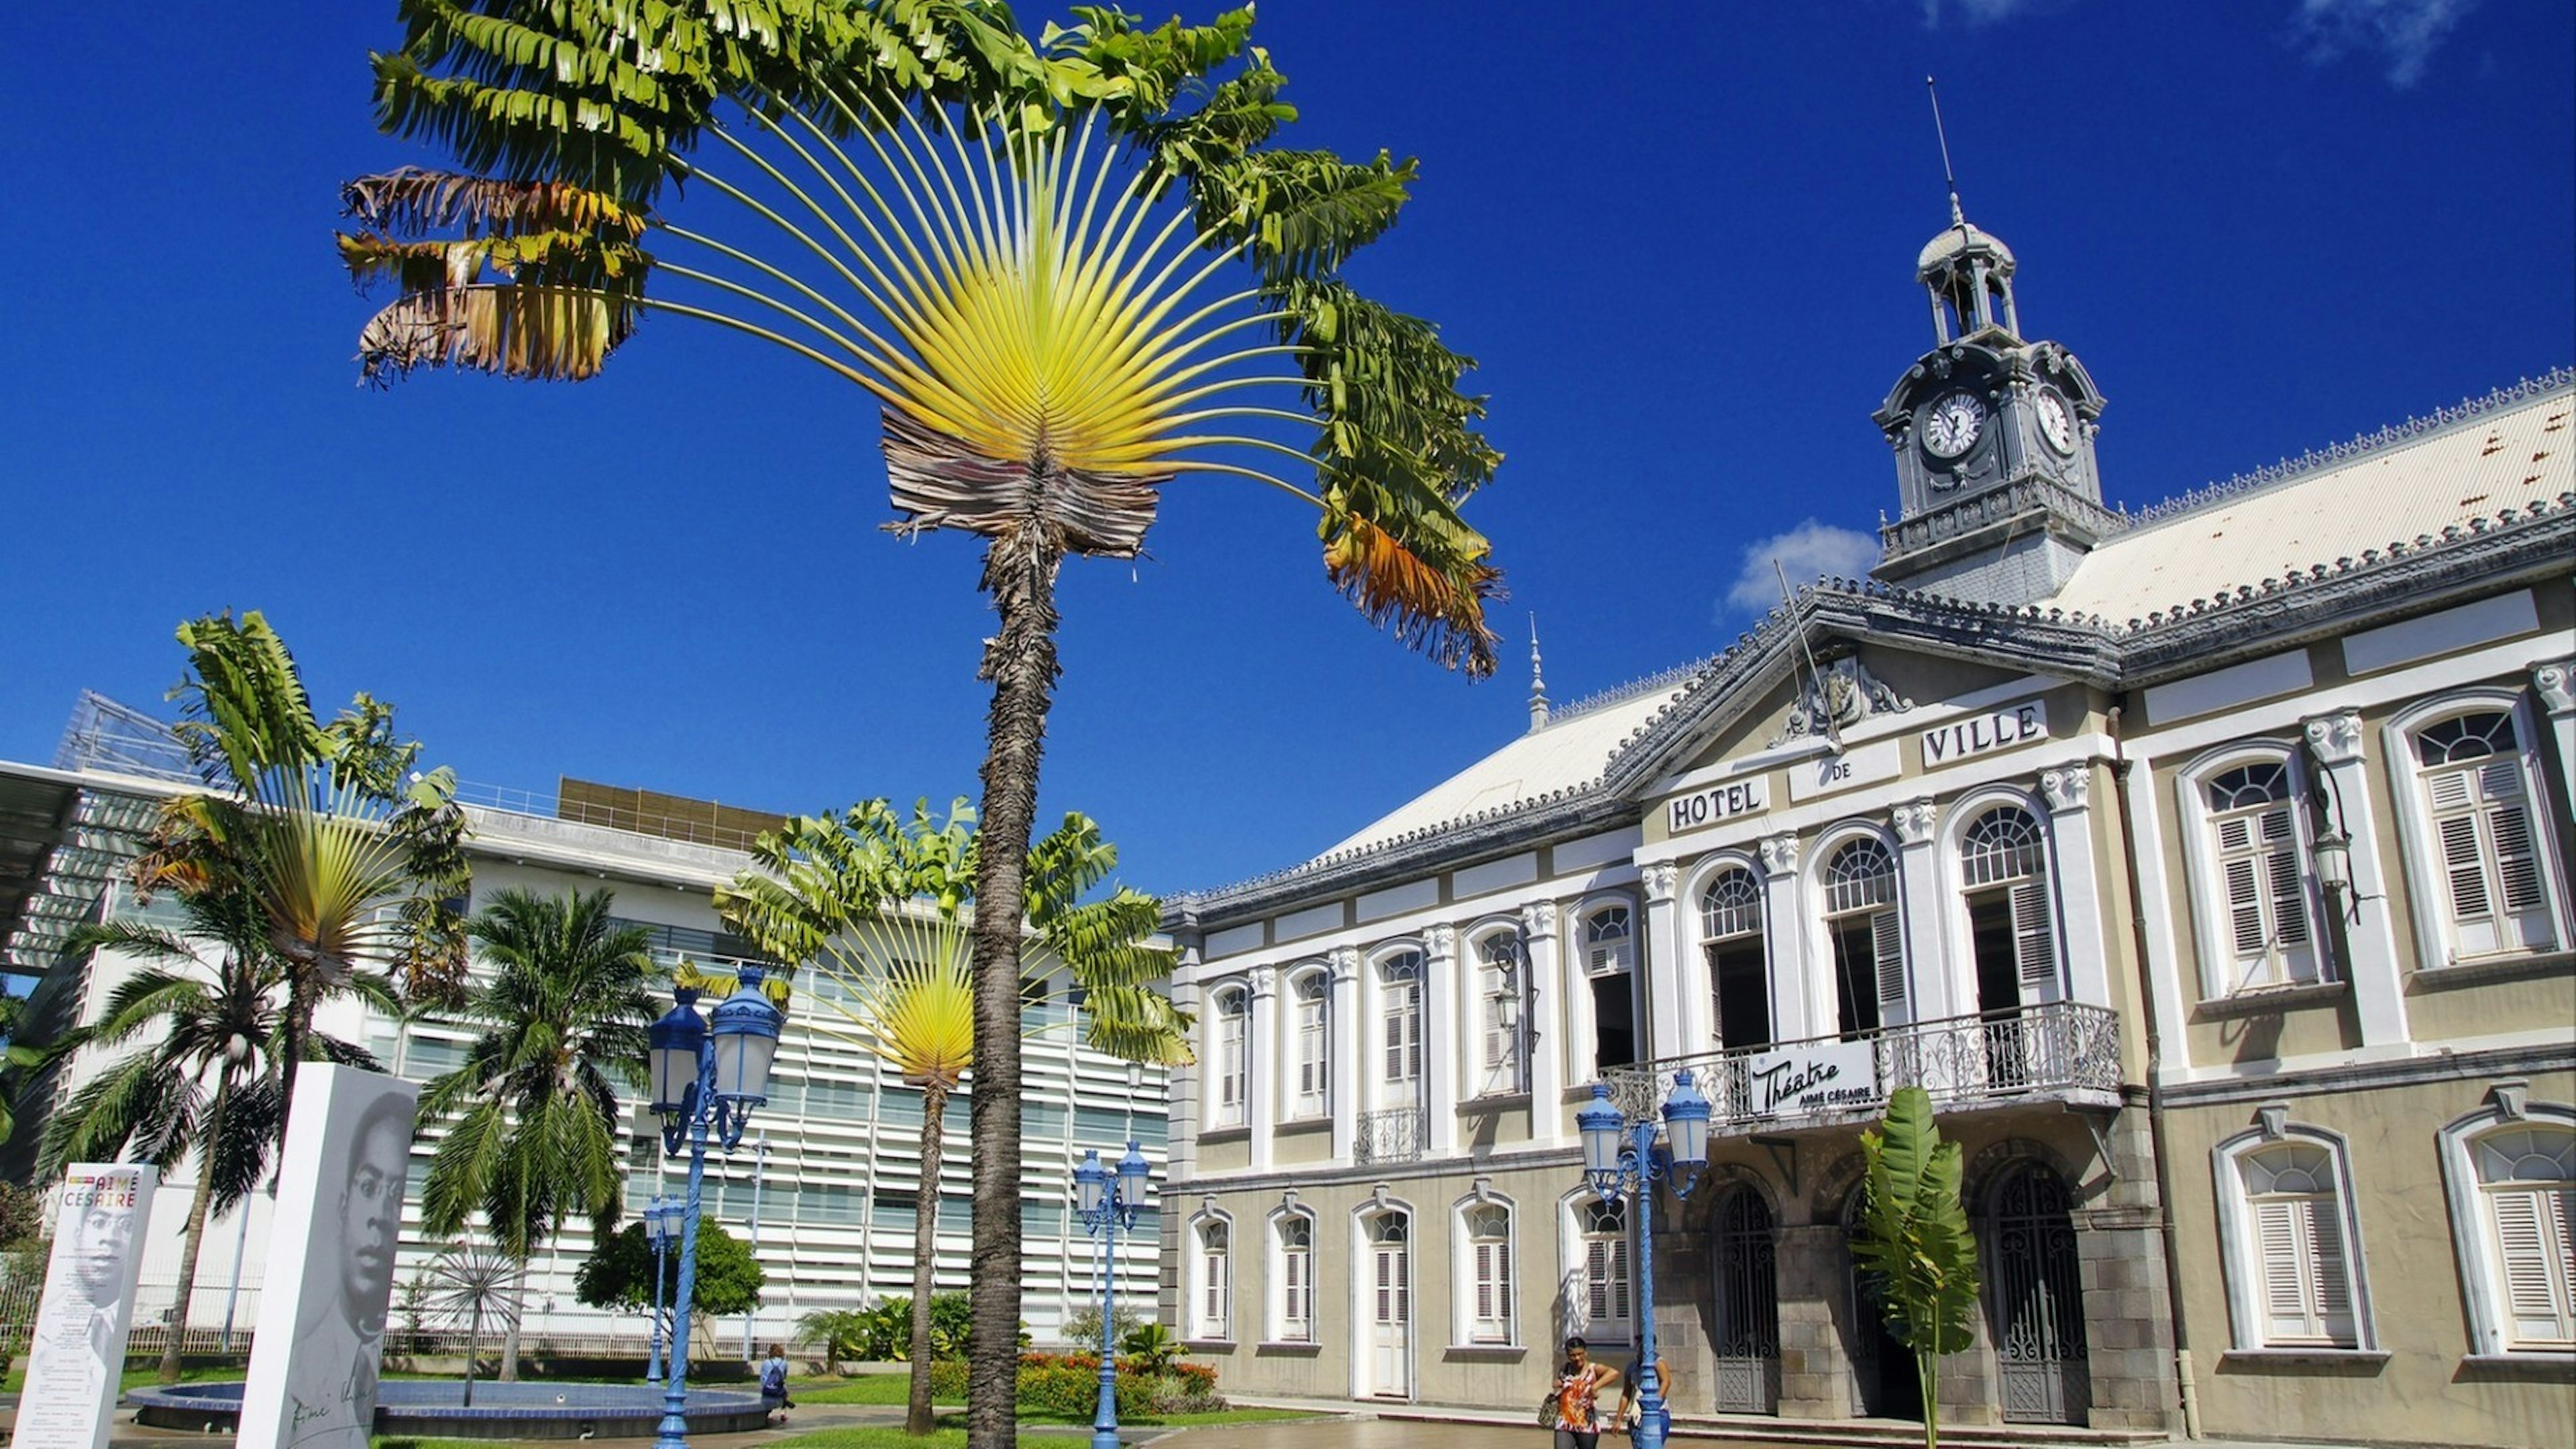 The ancient town hall of Fort-de-France and Aime Cesaire theater. Fort de France is the capital of Martinique island, Lesser Antilles